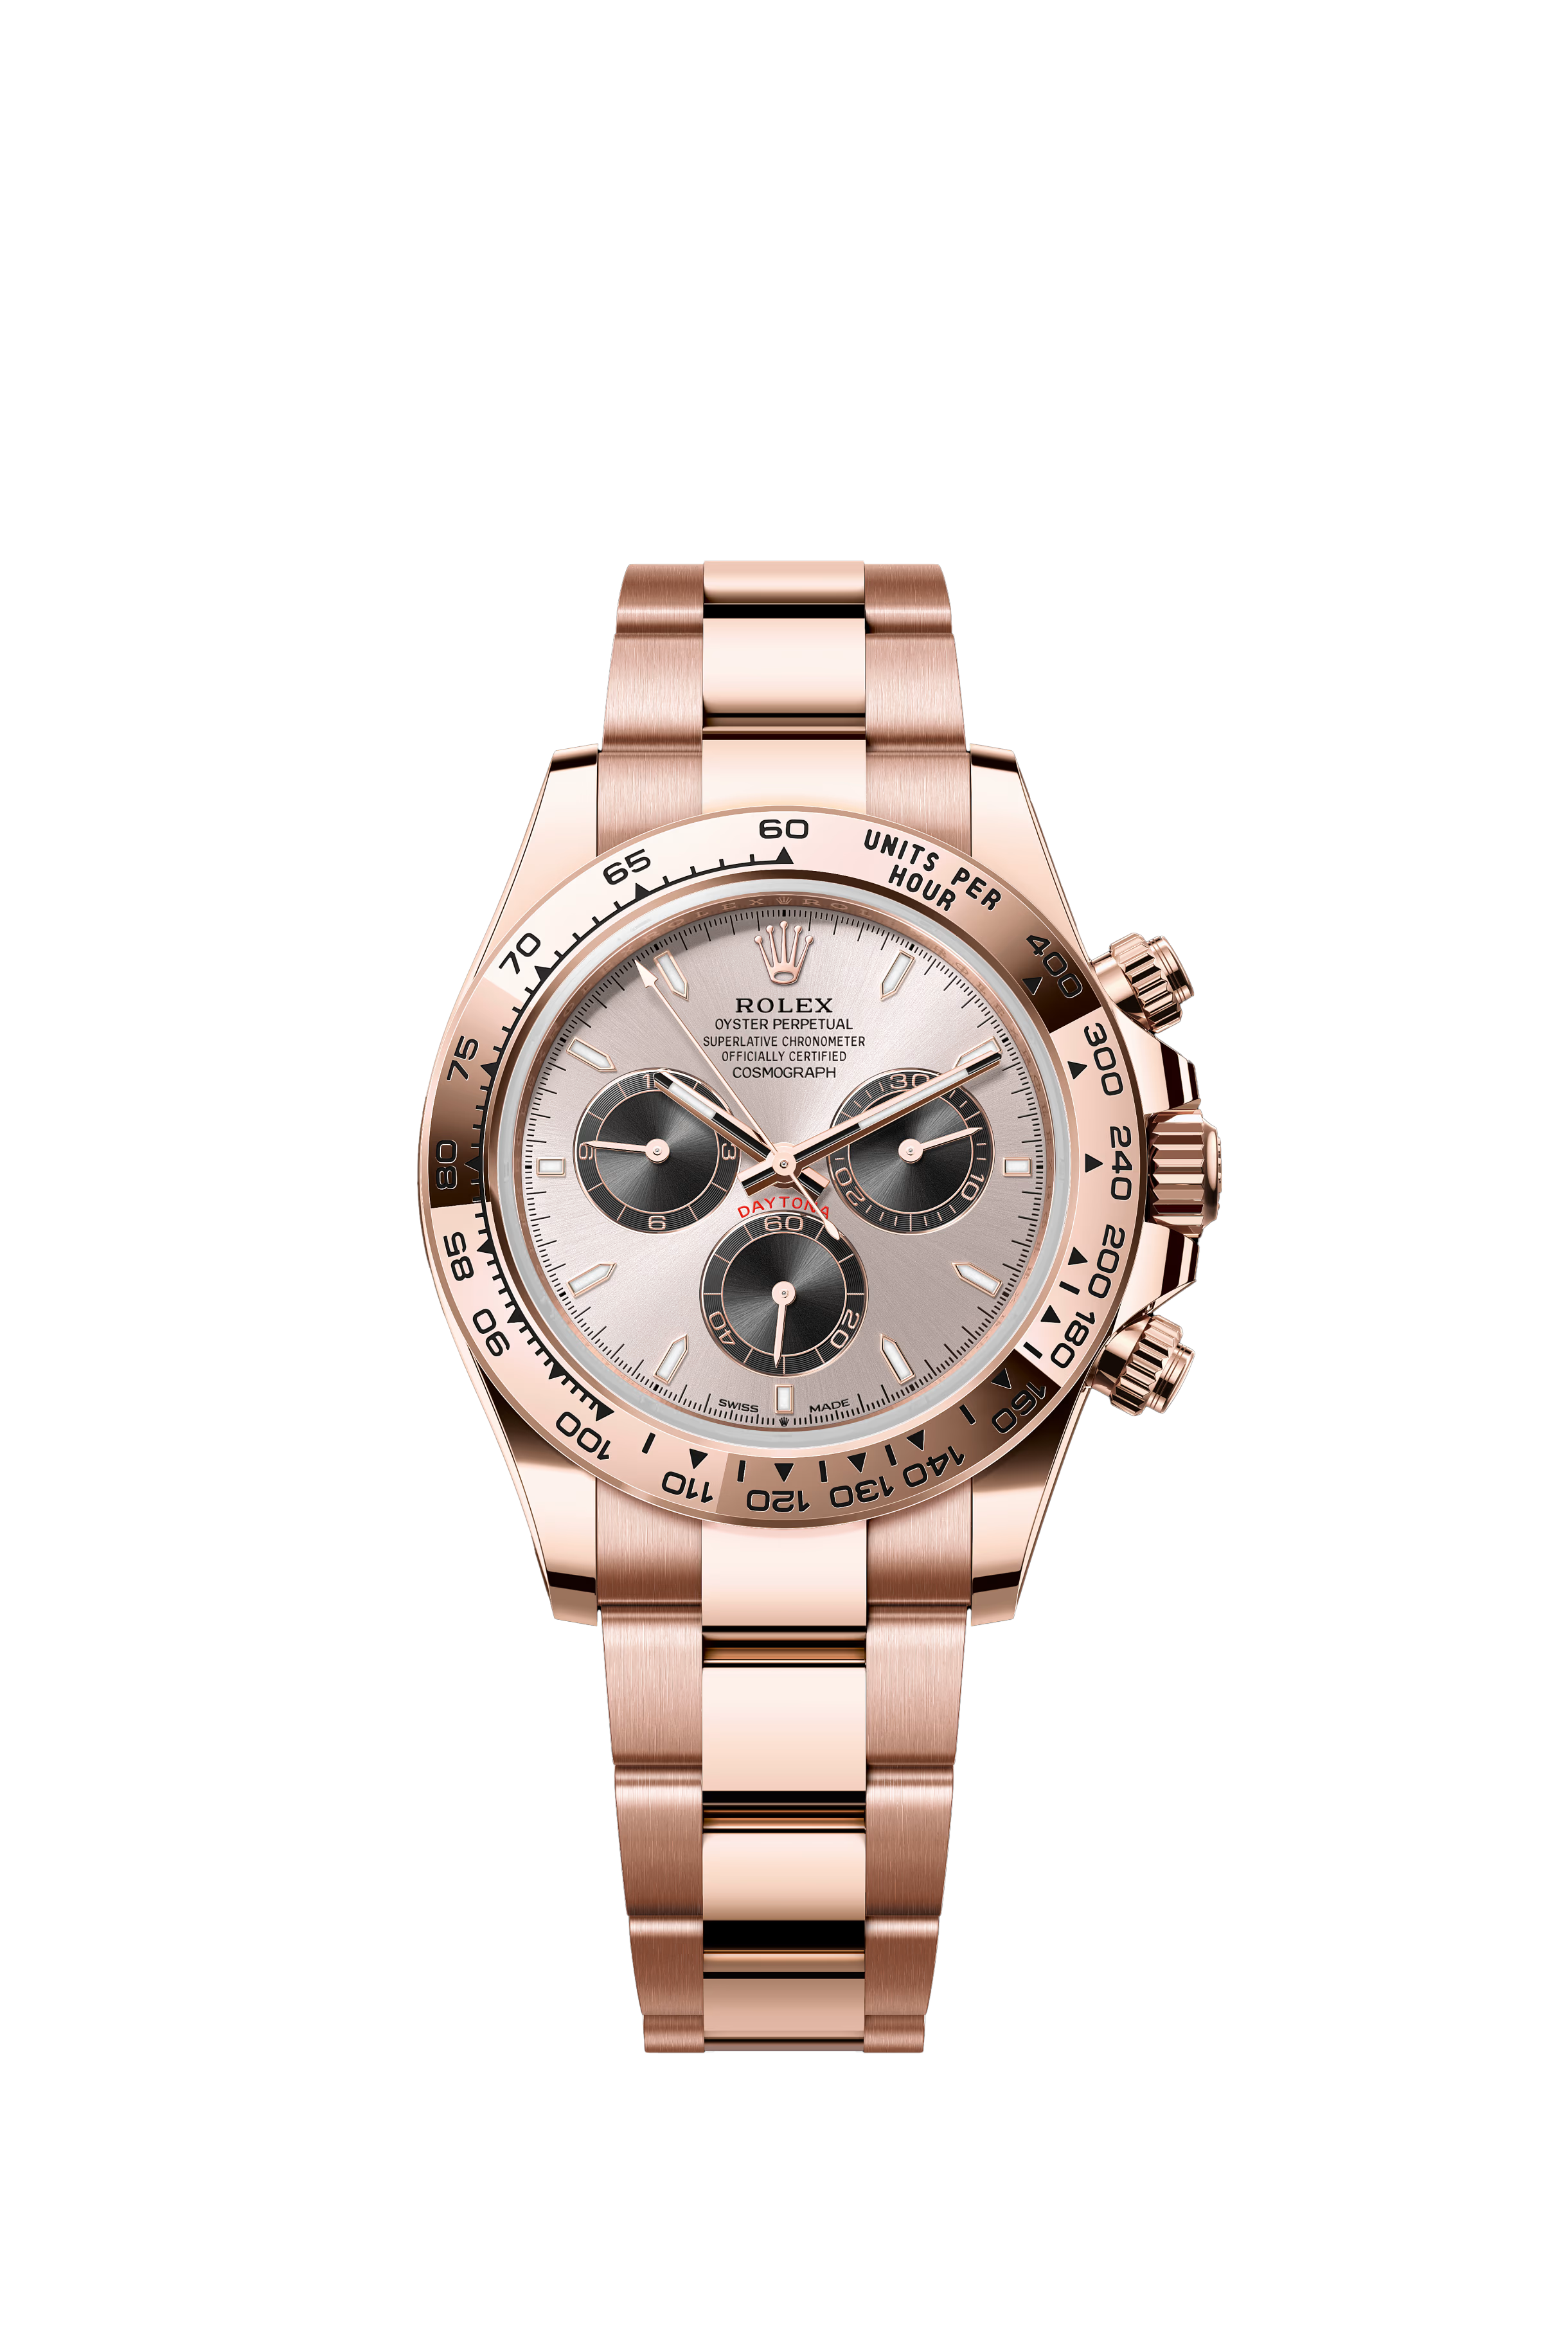 Rolex Cosmograph Daytona Oyster, 40 mm, Everose gold Reference 126505